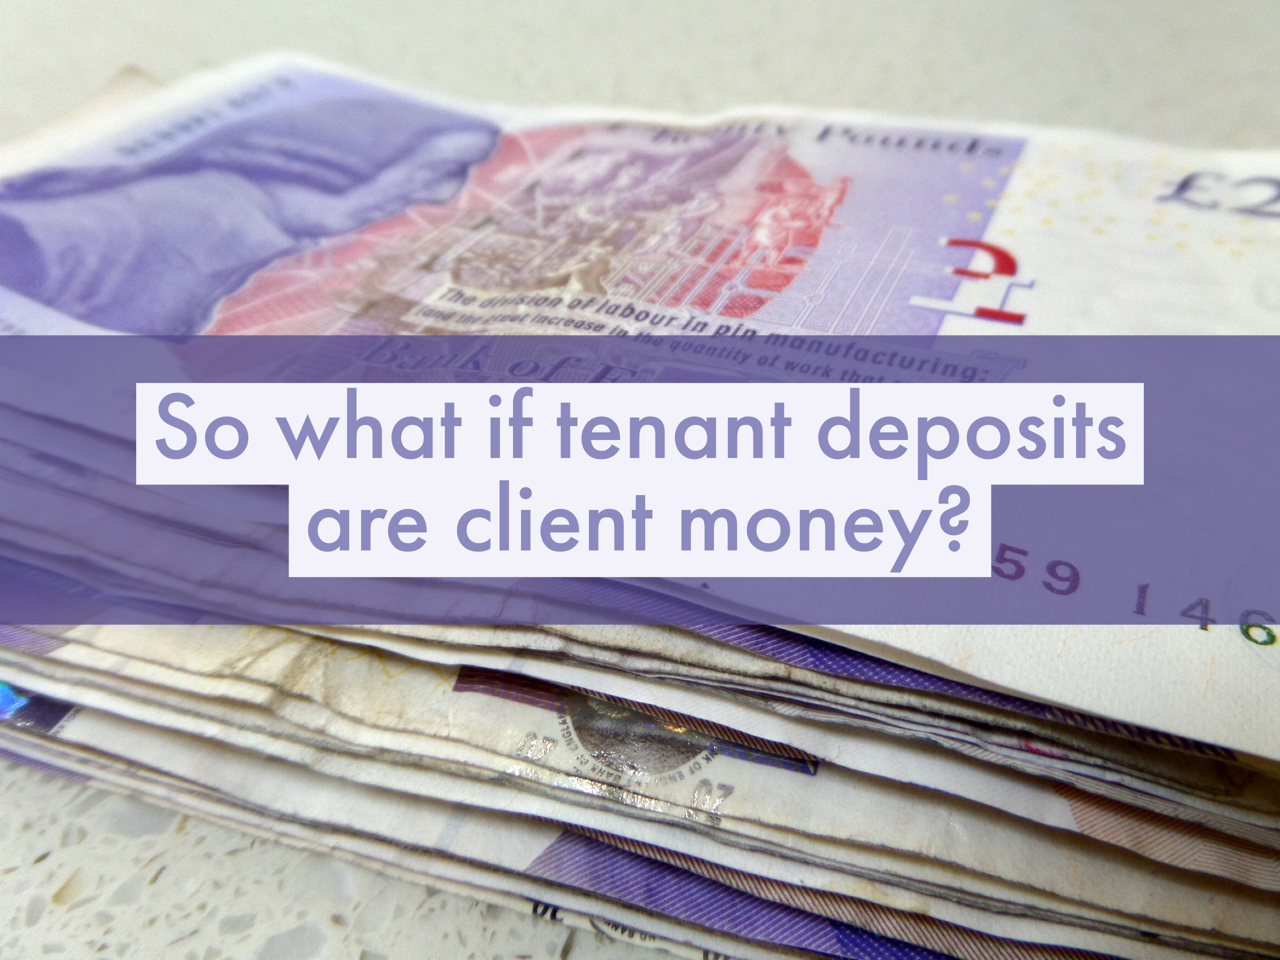 So what if tenant deposits are client money? Image